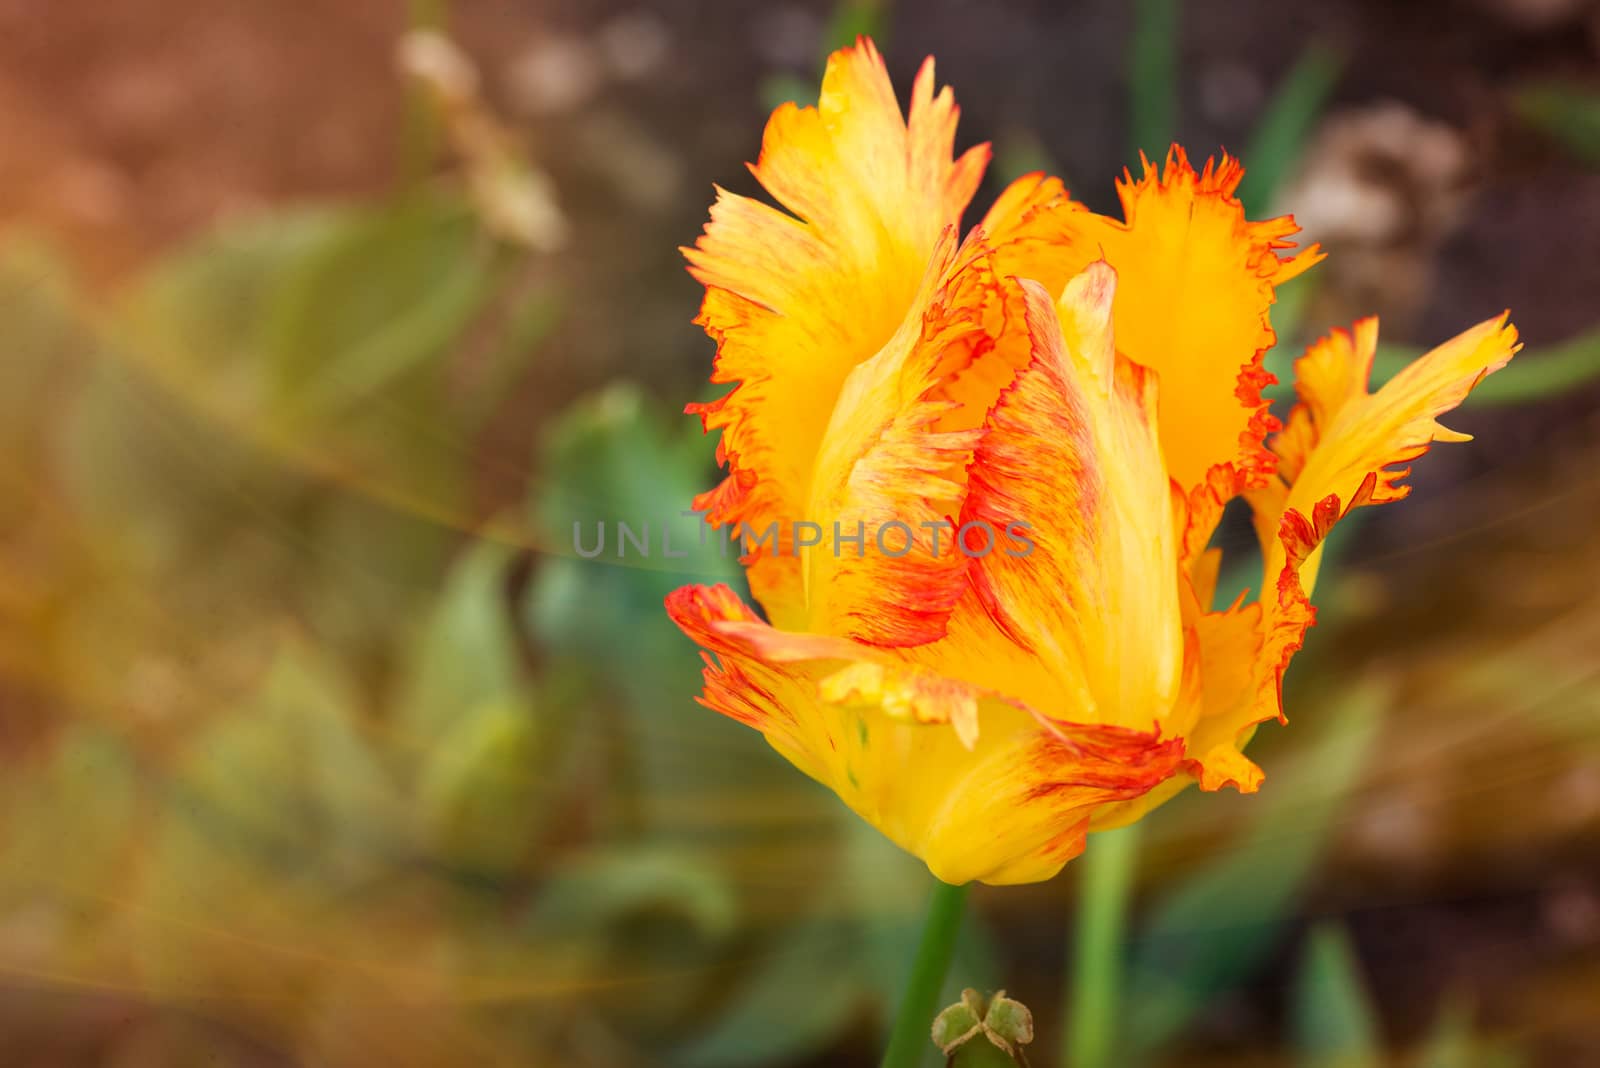 Yellow and Orange Fringed Tulip in the Garden by MaxalTamor